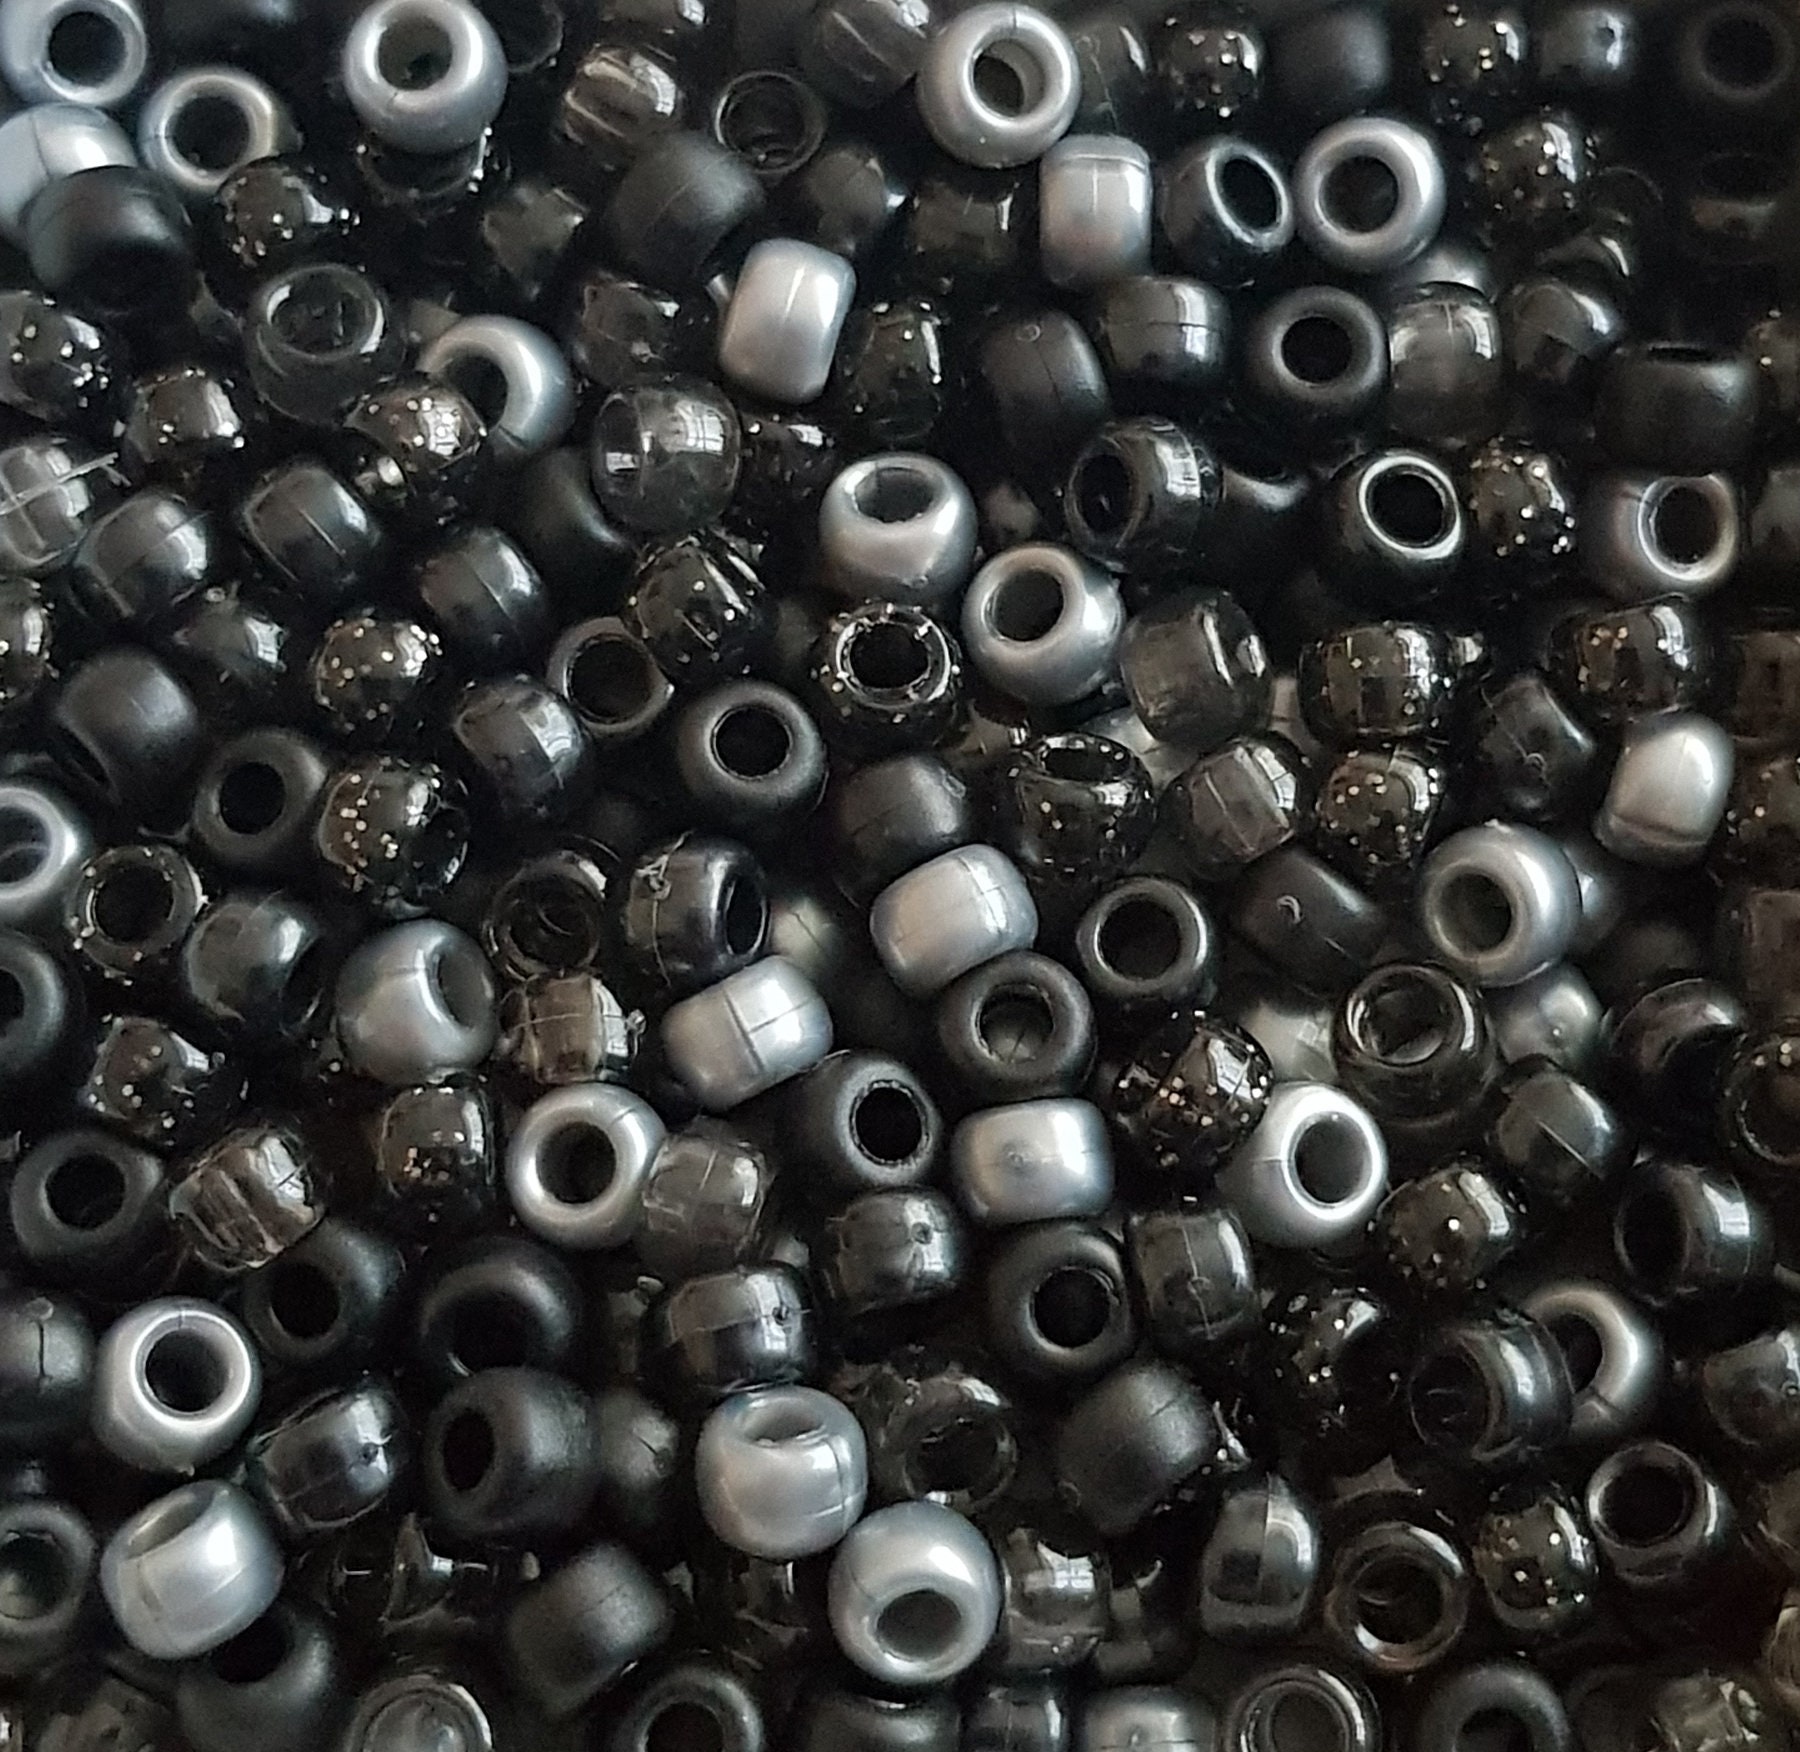 9mm Jet Black Pony Beads Czech Glass Roller Beads 3mm Hole Round Spacer  Beads, 20pc 3592 